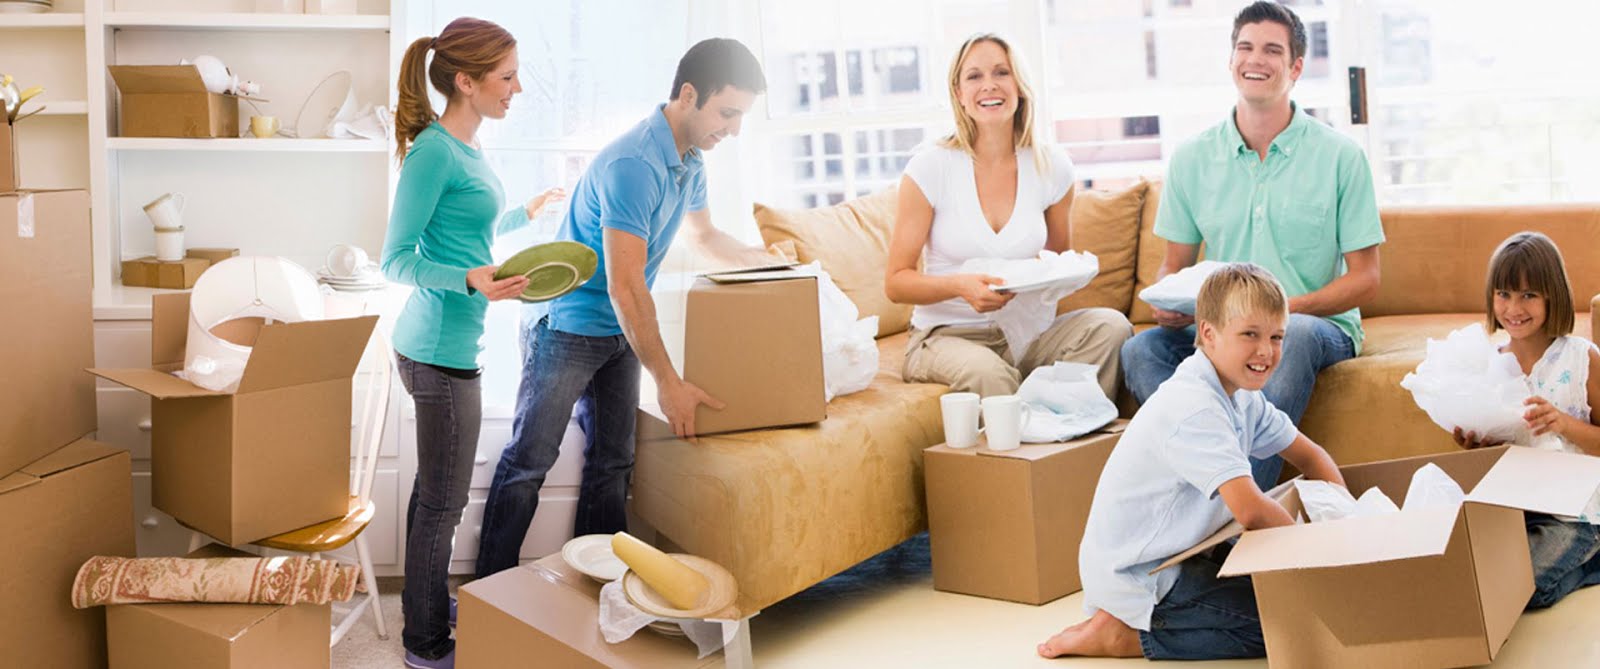 Packers and Movers | Best Packers and Movers | Movers and Packer in India | Maple Packers